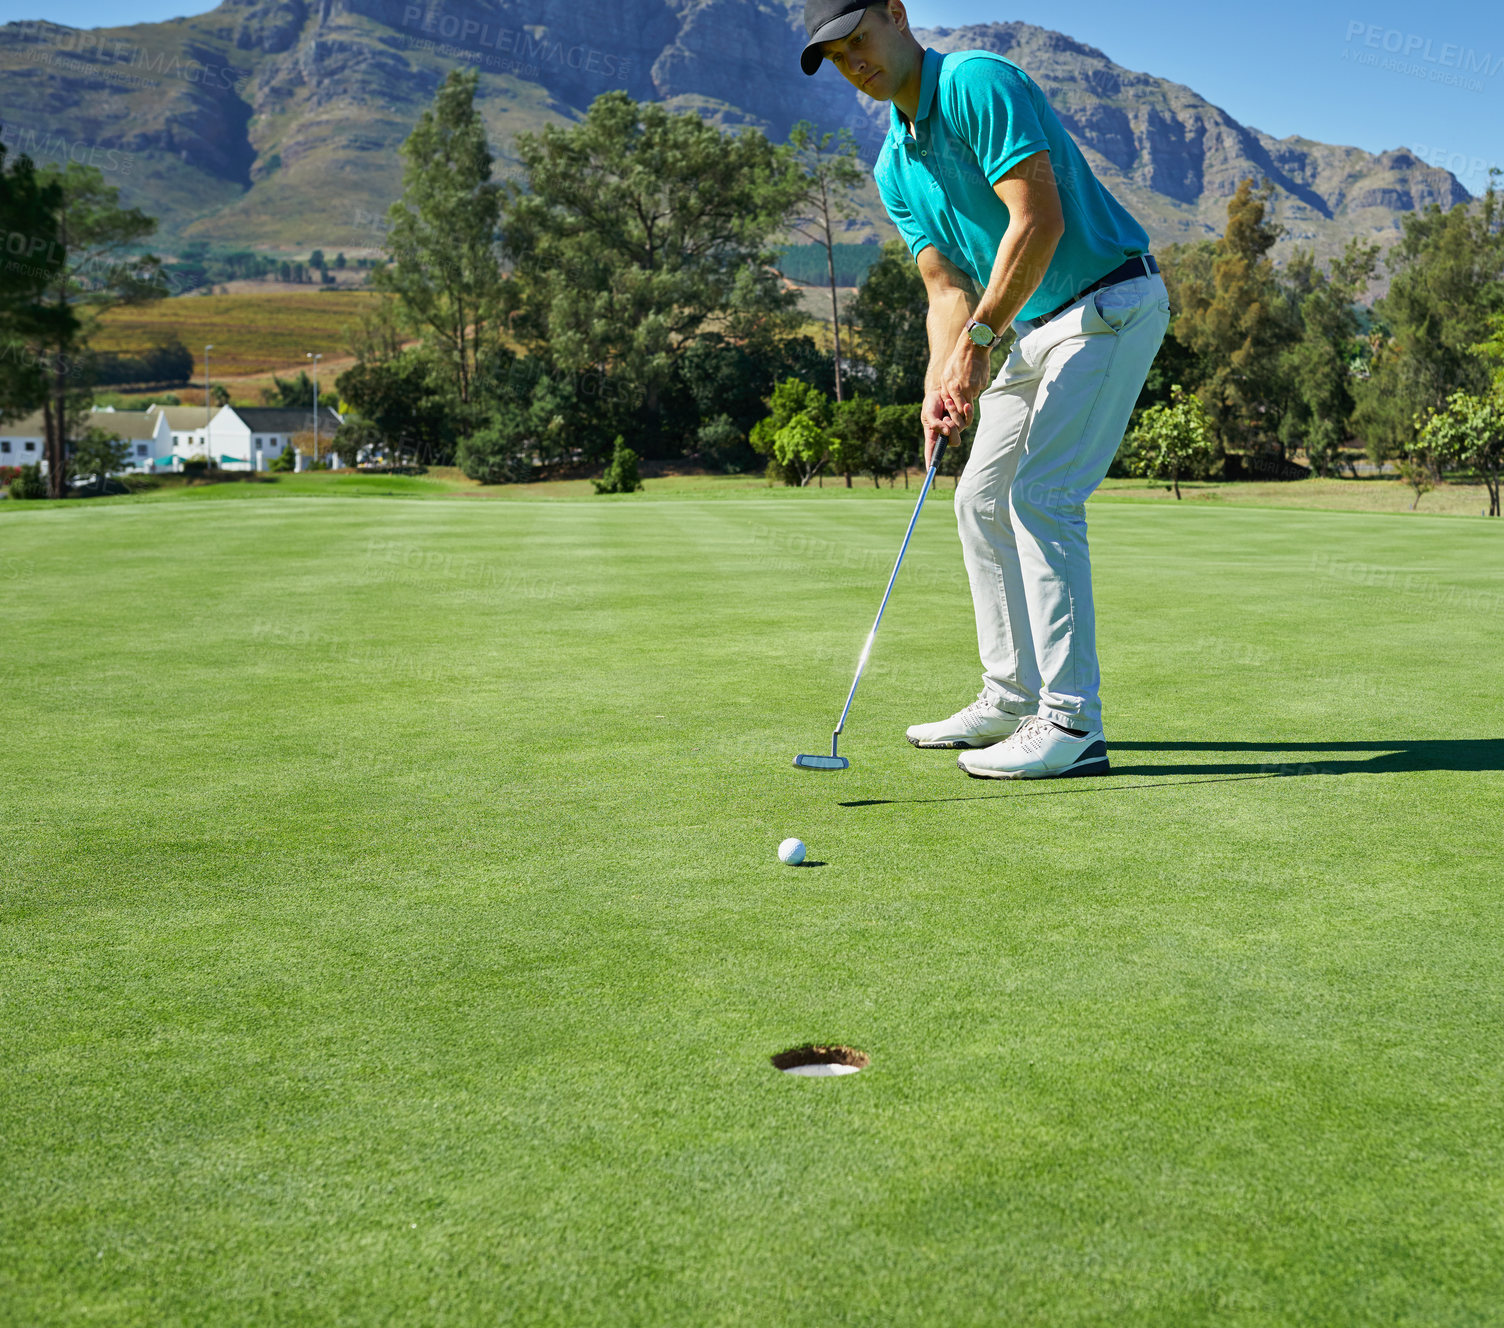 Buy stock photo Shot of a focused young man hitting a golfball with a putter into a hole on a golf course